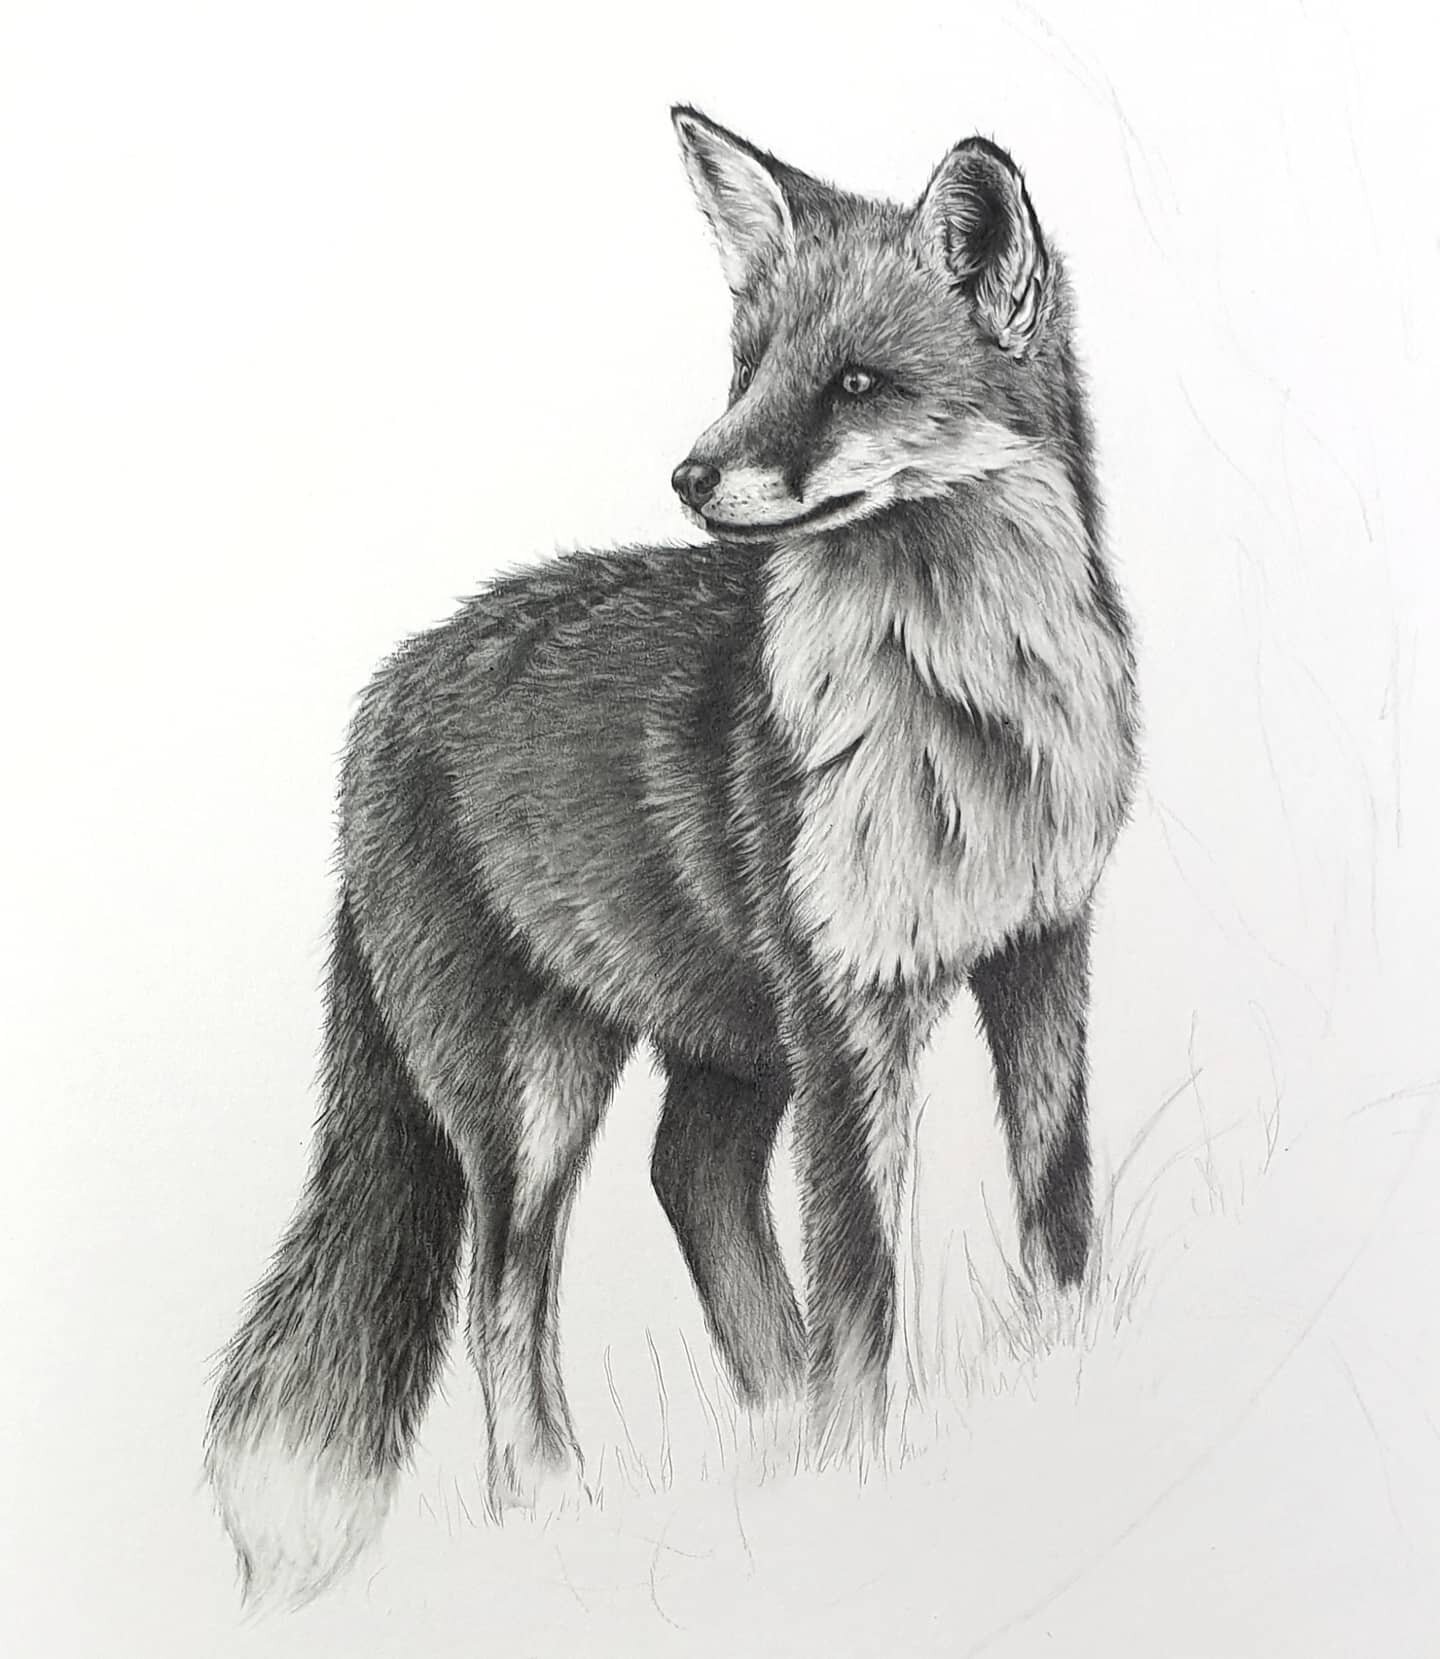 Fox pretty much finished, now to spend the next couple of years faffing with foliage 🤦🏼&zwj;♀️

#fox #foxesofinstagram #redfox #artoftheday #instaart #artwork #wip #art #artist #contemporary #newcontemporary #art_realism #realism #sharingart #thena